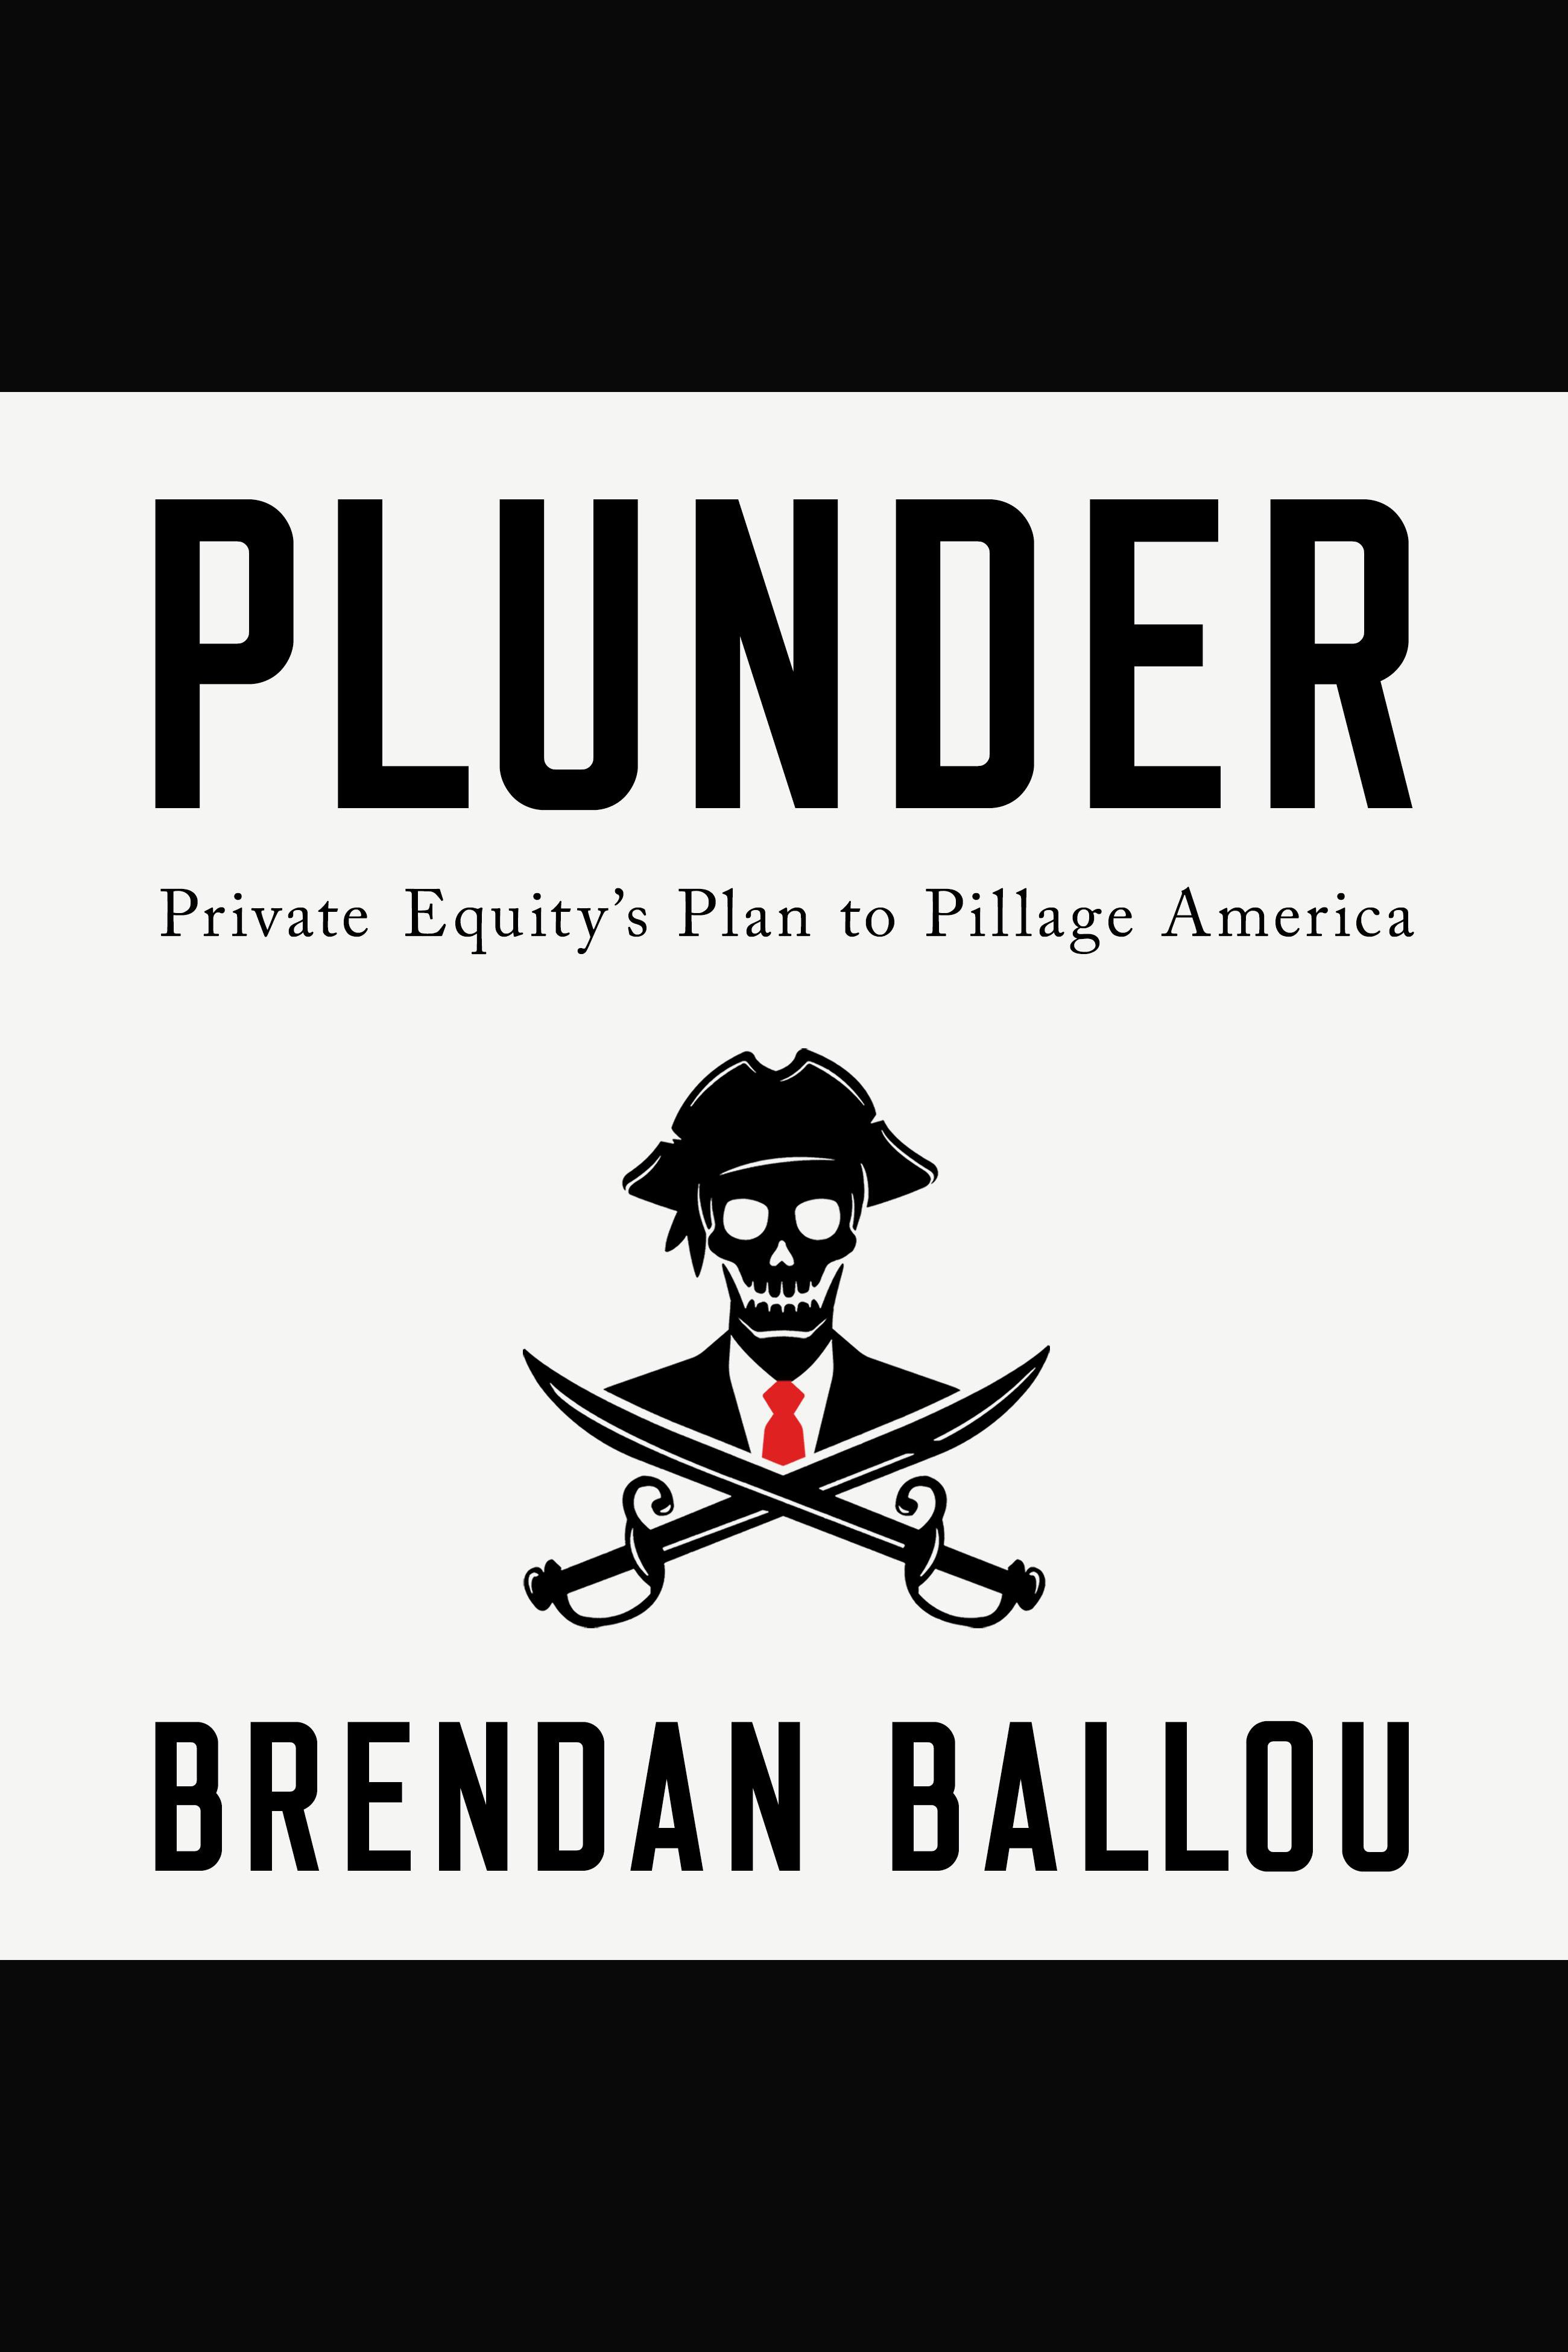 Plunder Private Equity's Plan to Pillage America cover image